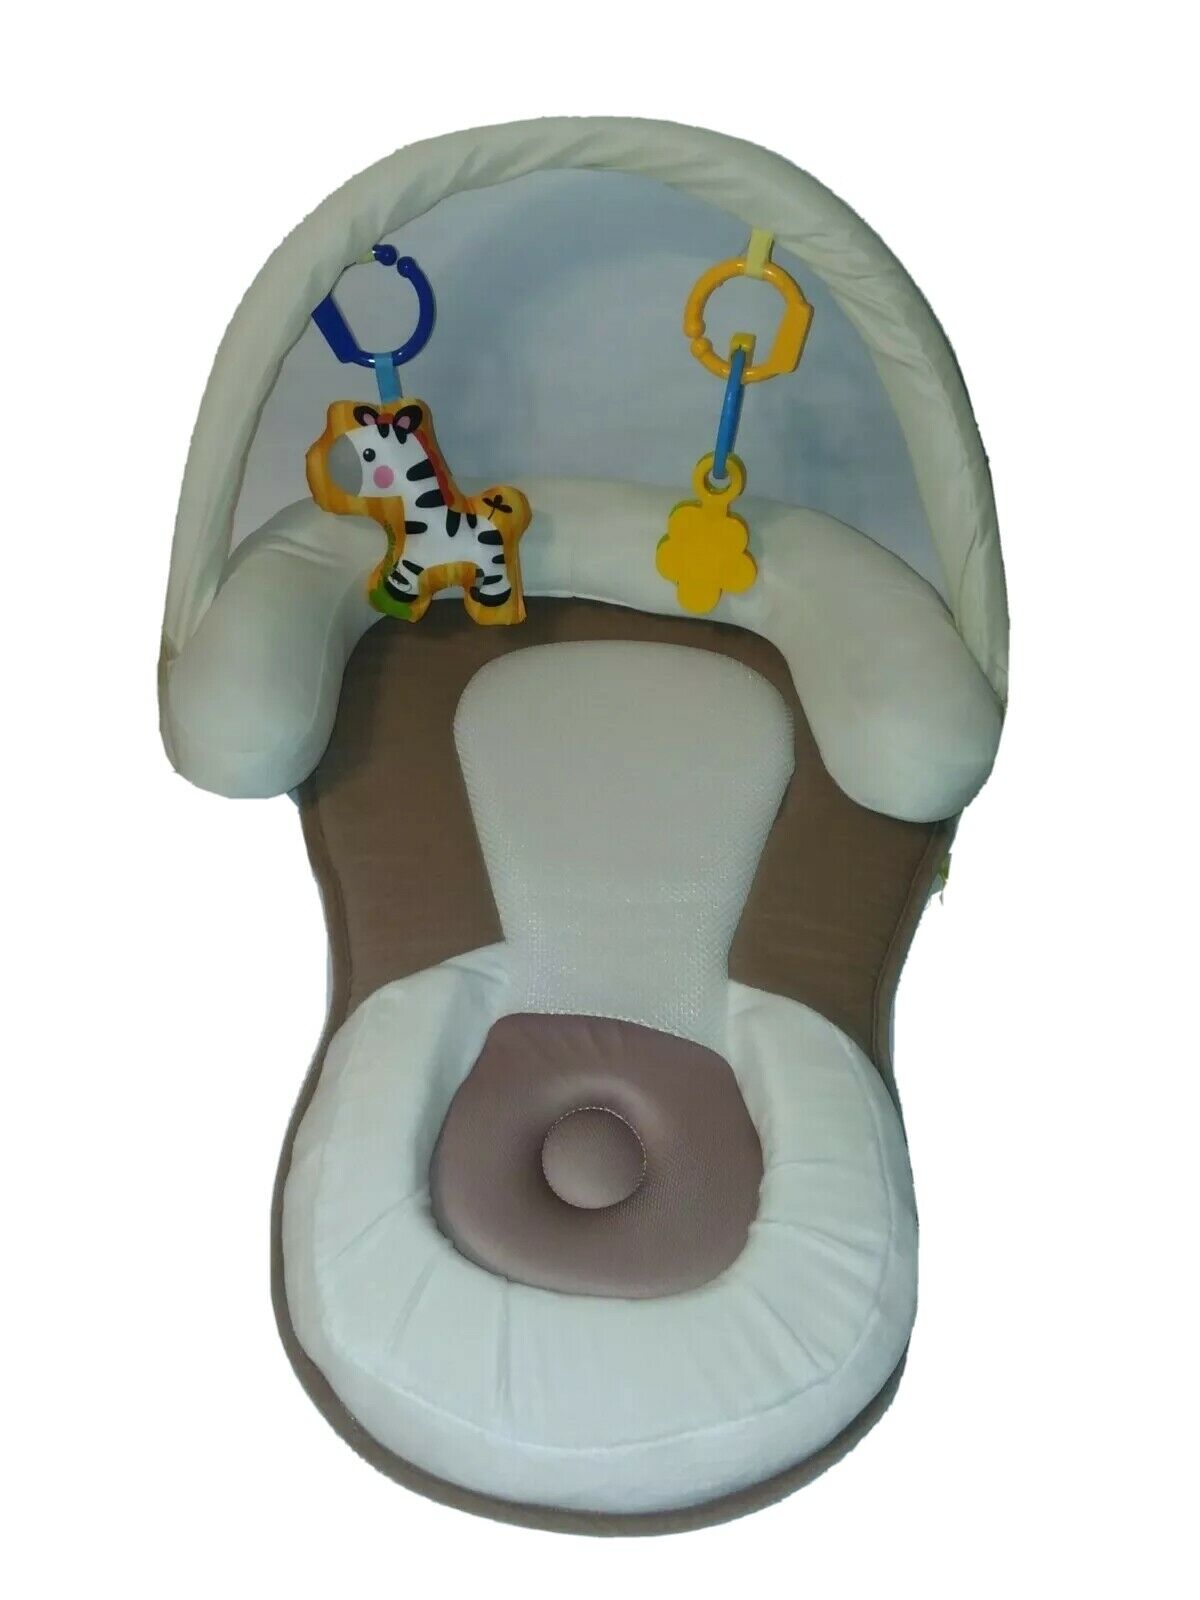 Easy Baby. Portable Baby Support Bed